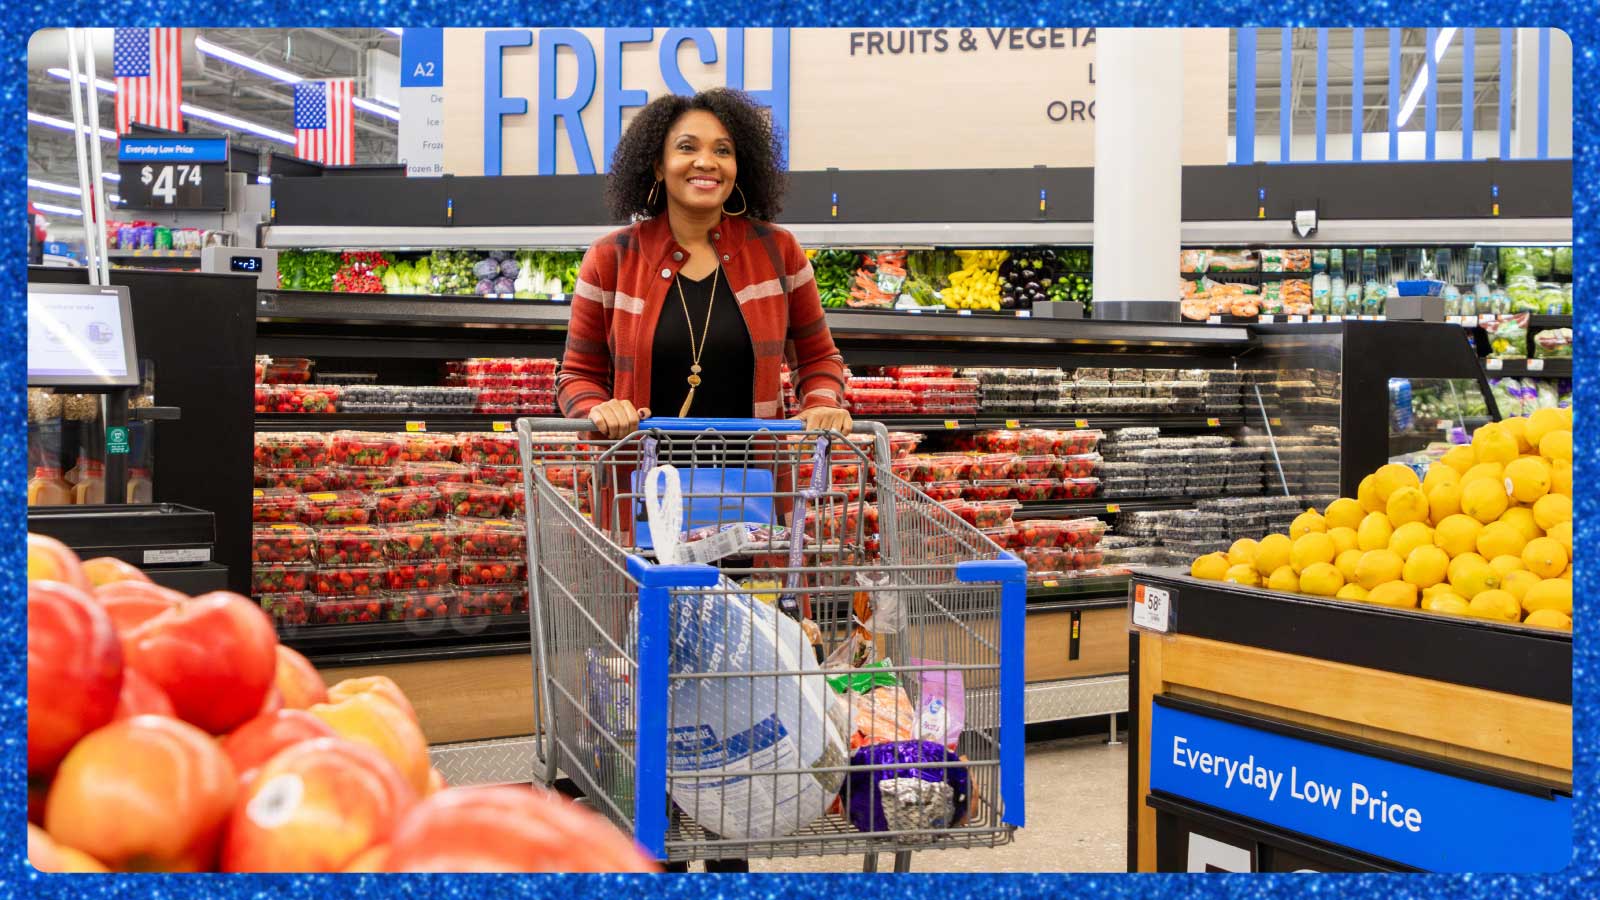 Sam's Club Shopping Carts: Fast Delivery & 60% Off!